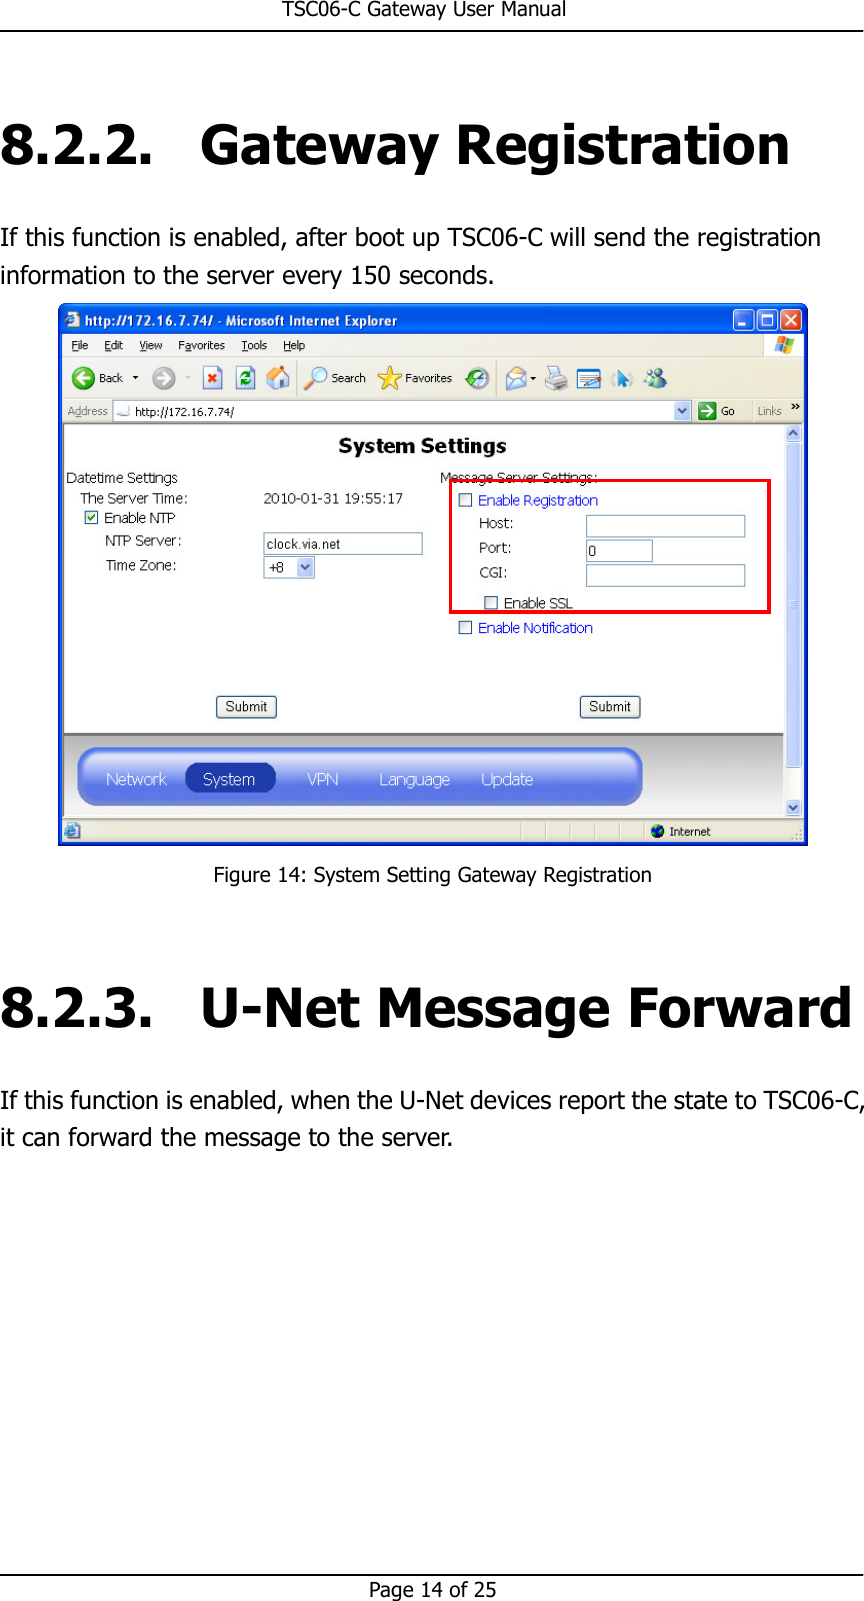                                                       TSC06-C Gateway User Manual   Page 14 of 25  8.2.2. Gateway Registration If this function is enabled, after boot up TSC06-C will send the registration information to the server every 150 seconds.  Figure 14: System Setting Gateway Registration  8.2.3. U-Net Message Forward If this function is enabled, when the U-Net devices report the state to TSC06-C, it can forward the message to the server.  